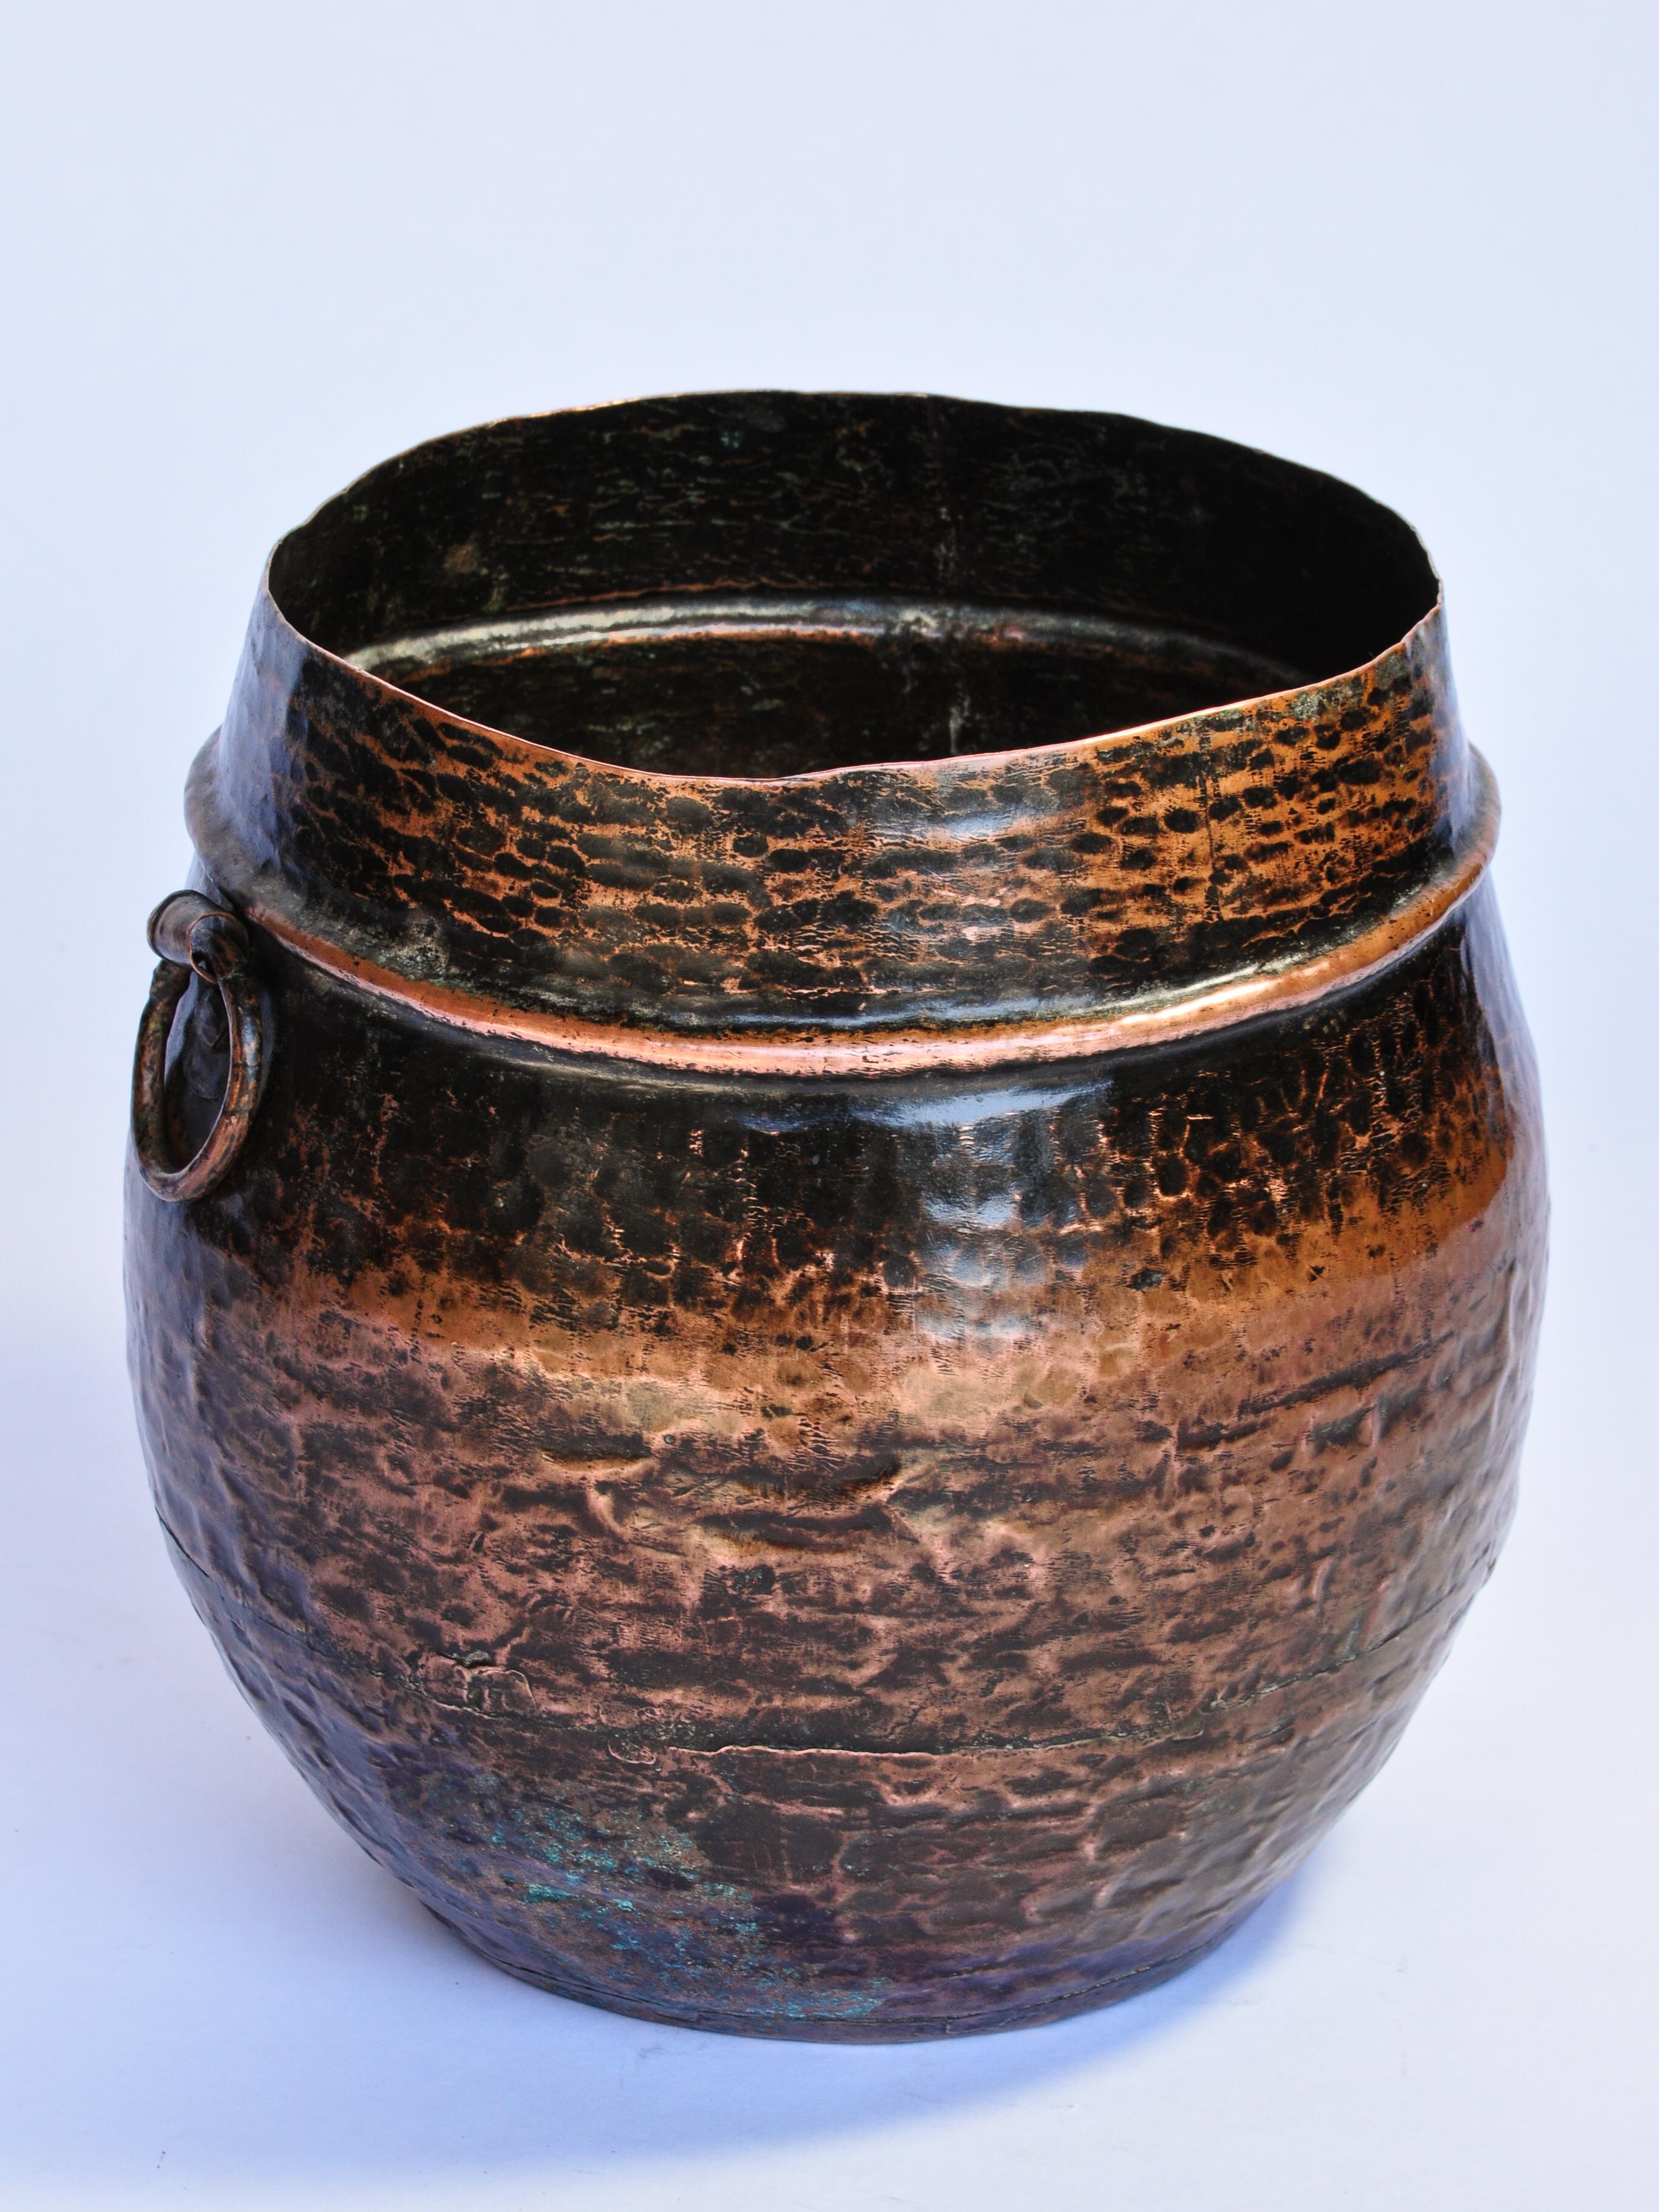 Vintage hand hammered copper measuring pot from Nepal, early to mid-20th century
This handcrafted rustic copper pot is called a Pathi, a standard unit of measure for grains and lentils. It would have been used in a market setting, as they still are